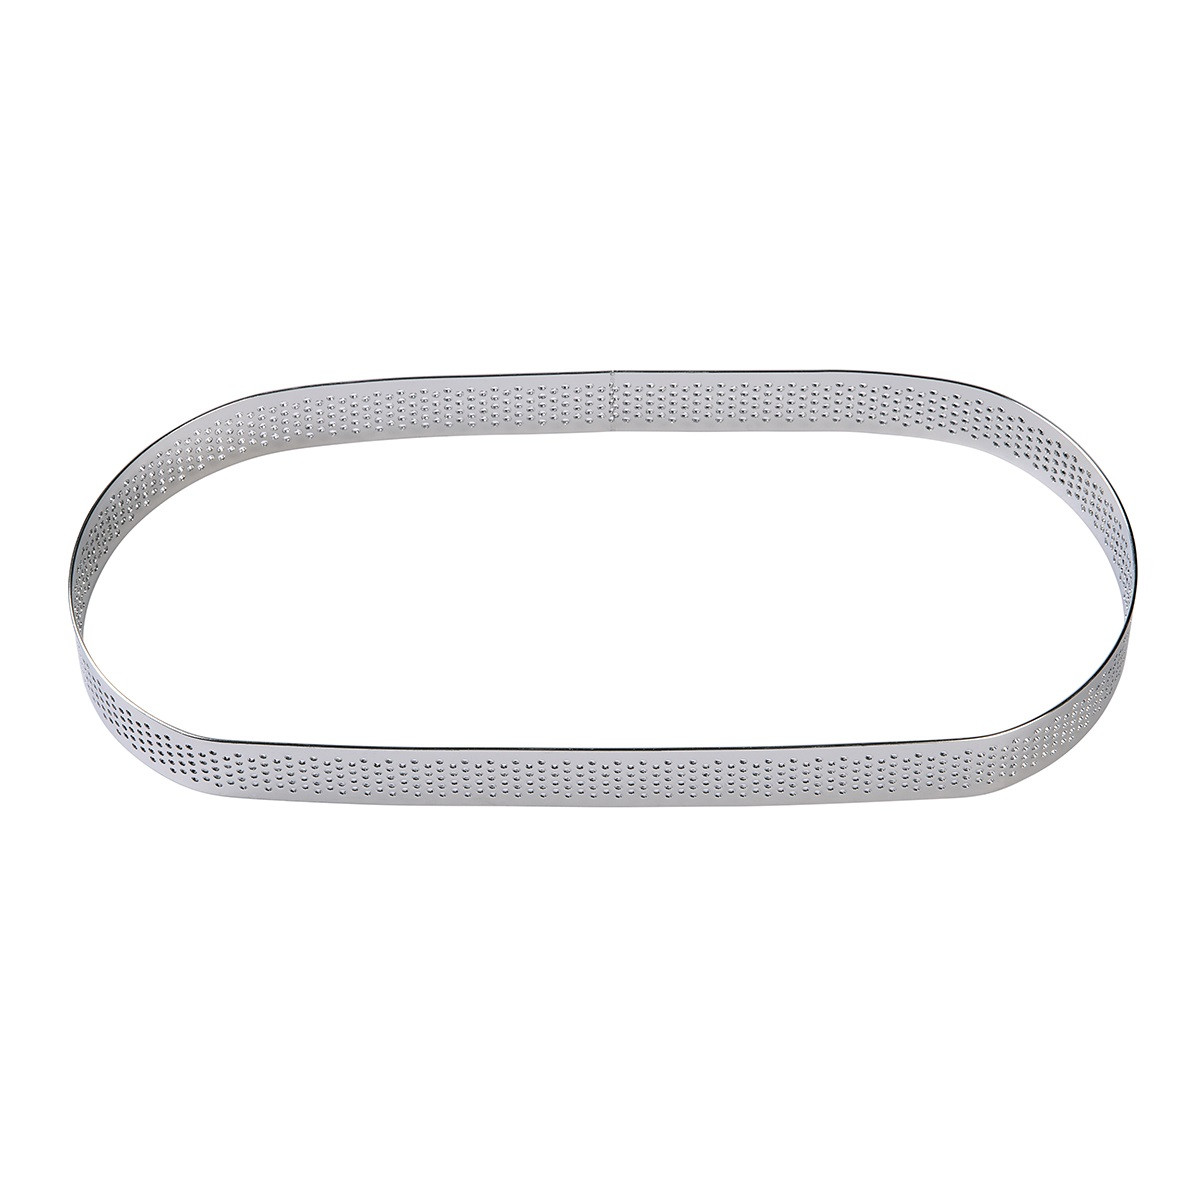 BrandNewCake Cake Ring Stainless Steel Oval Perforated 22.5x9x2cm